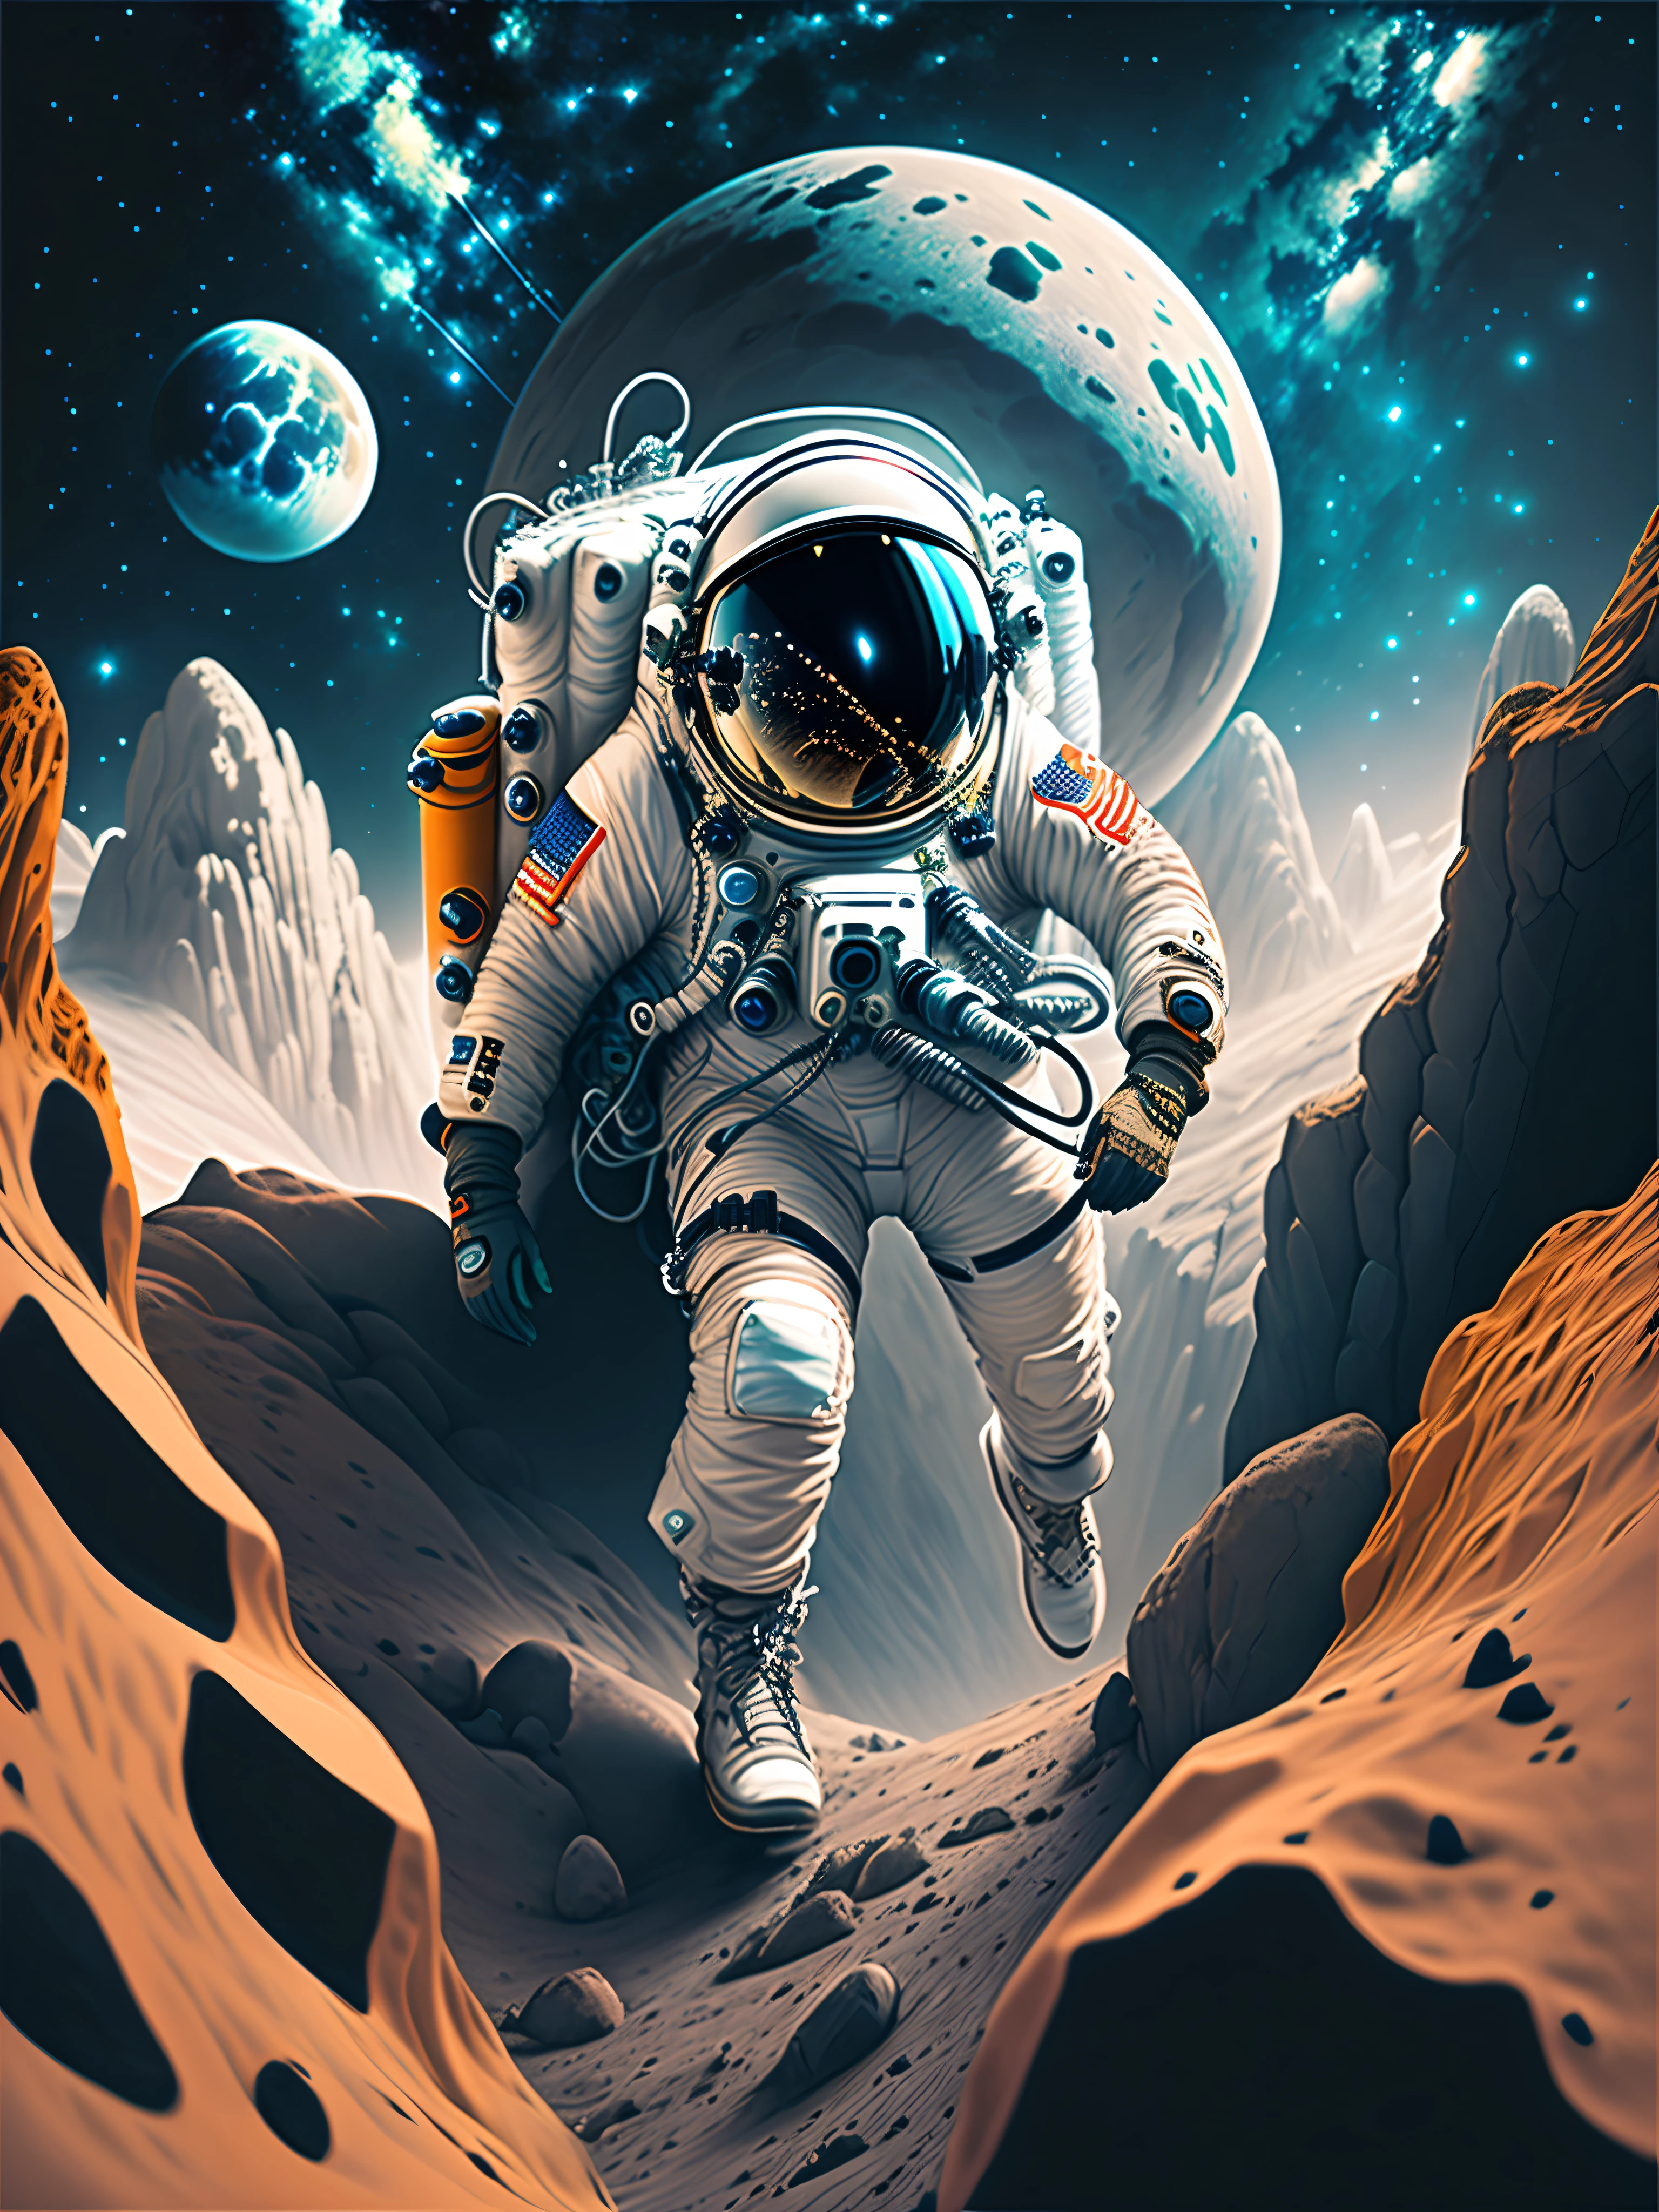 (Close-up of astronaut climbing a rocky cliff in a 空間suit), fully 空間 suited, astronaut lost in liminal 空間, dusty 空間 suit, 宇航员, astronaut in 空間, ("Lunar 空間" 主題）, 詳細的太空人, astronaut in 空間, 太空衣, 红移共振, （宇航员s climbing cliffs in 空間）, 下面的太空人, 空間 backround, wear 空間suits, 宇航员 Cyberpunk Electric, 空間